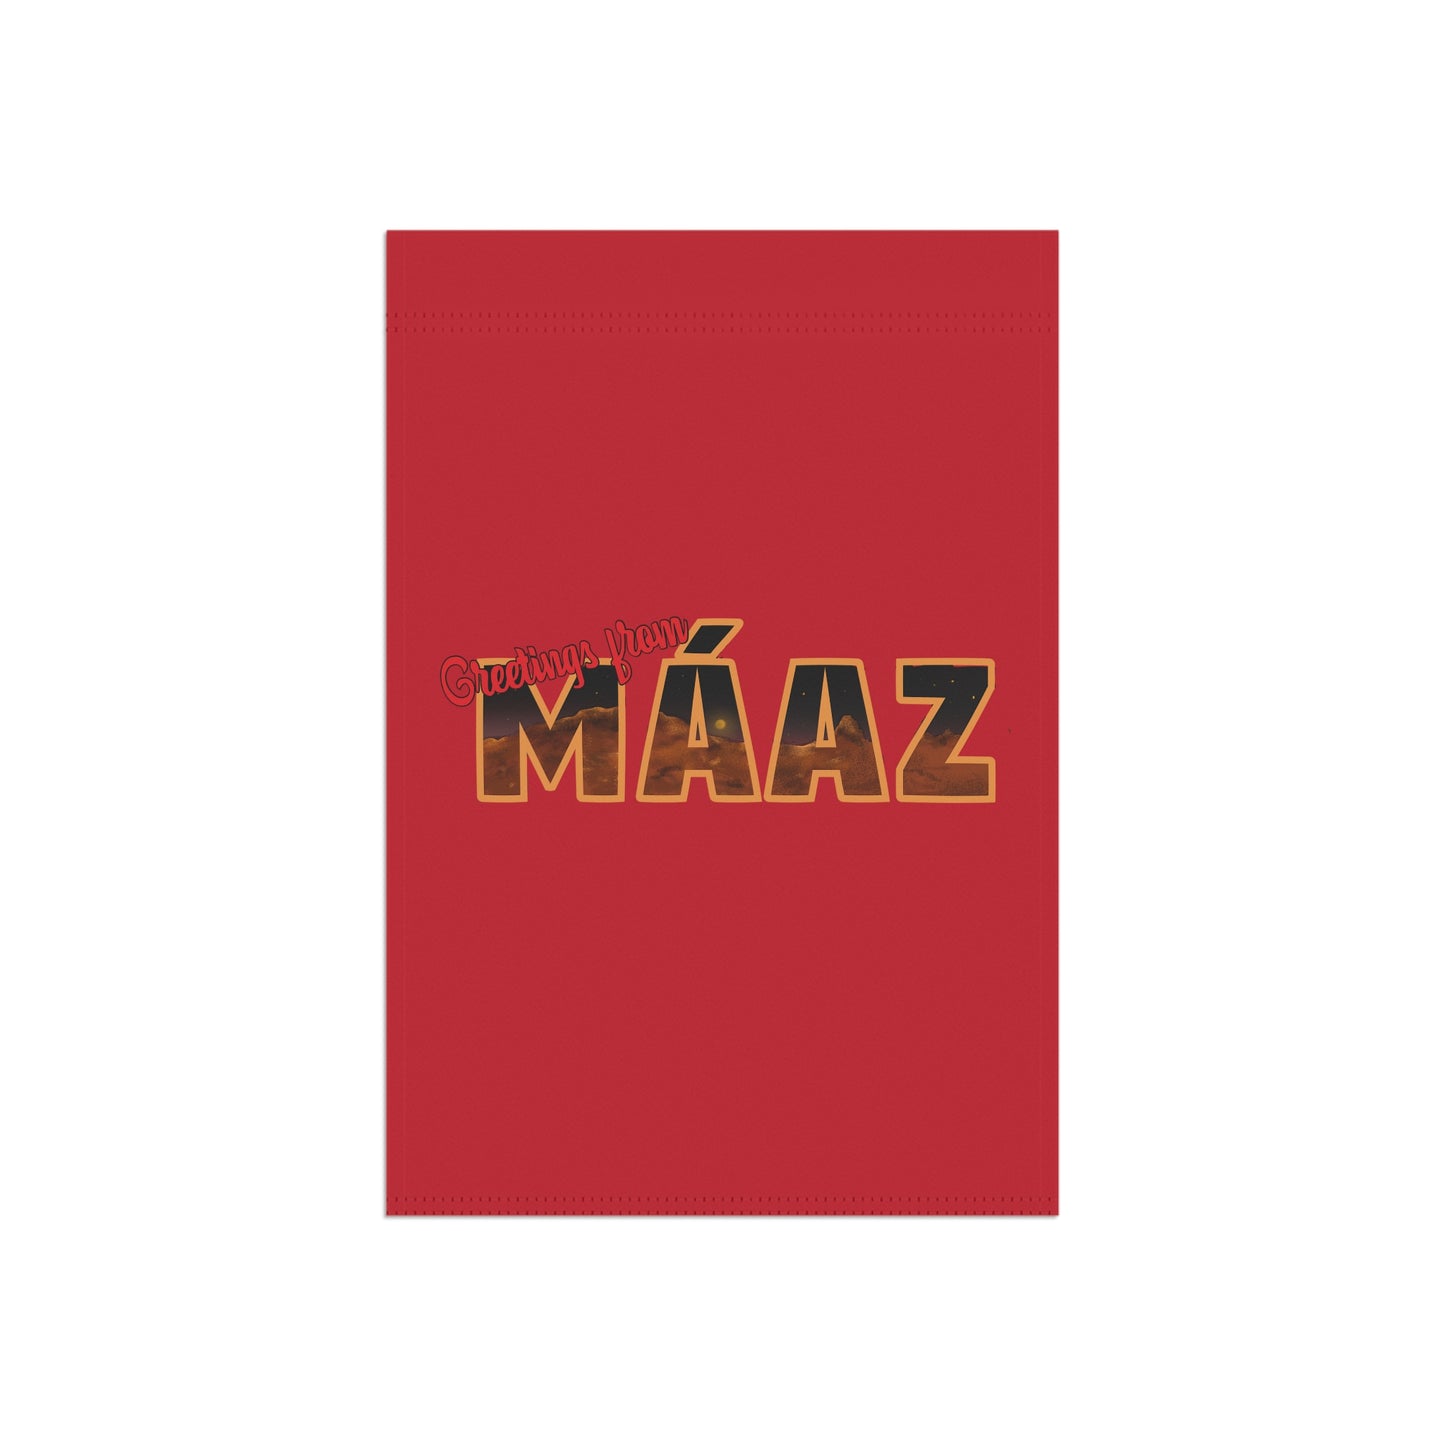 Greetings from Máaz Garden & House Banner